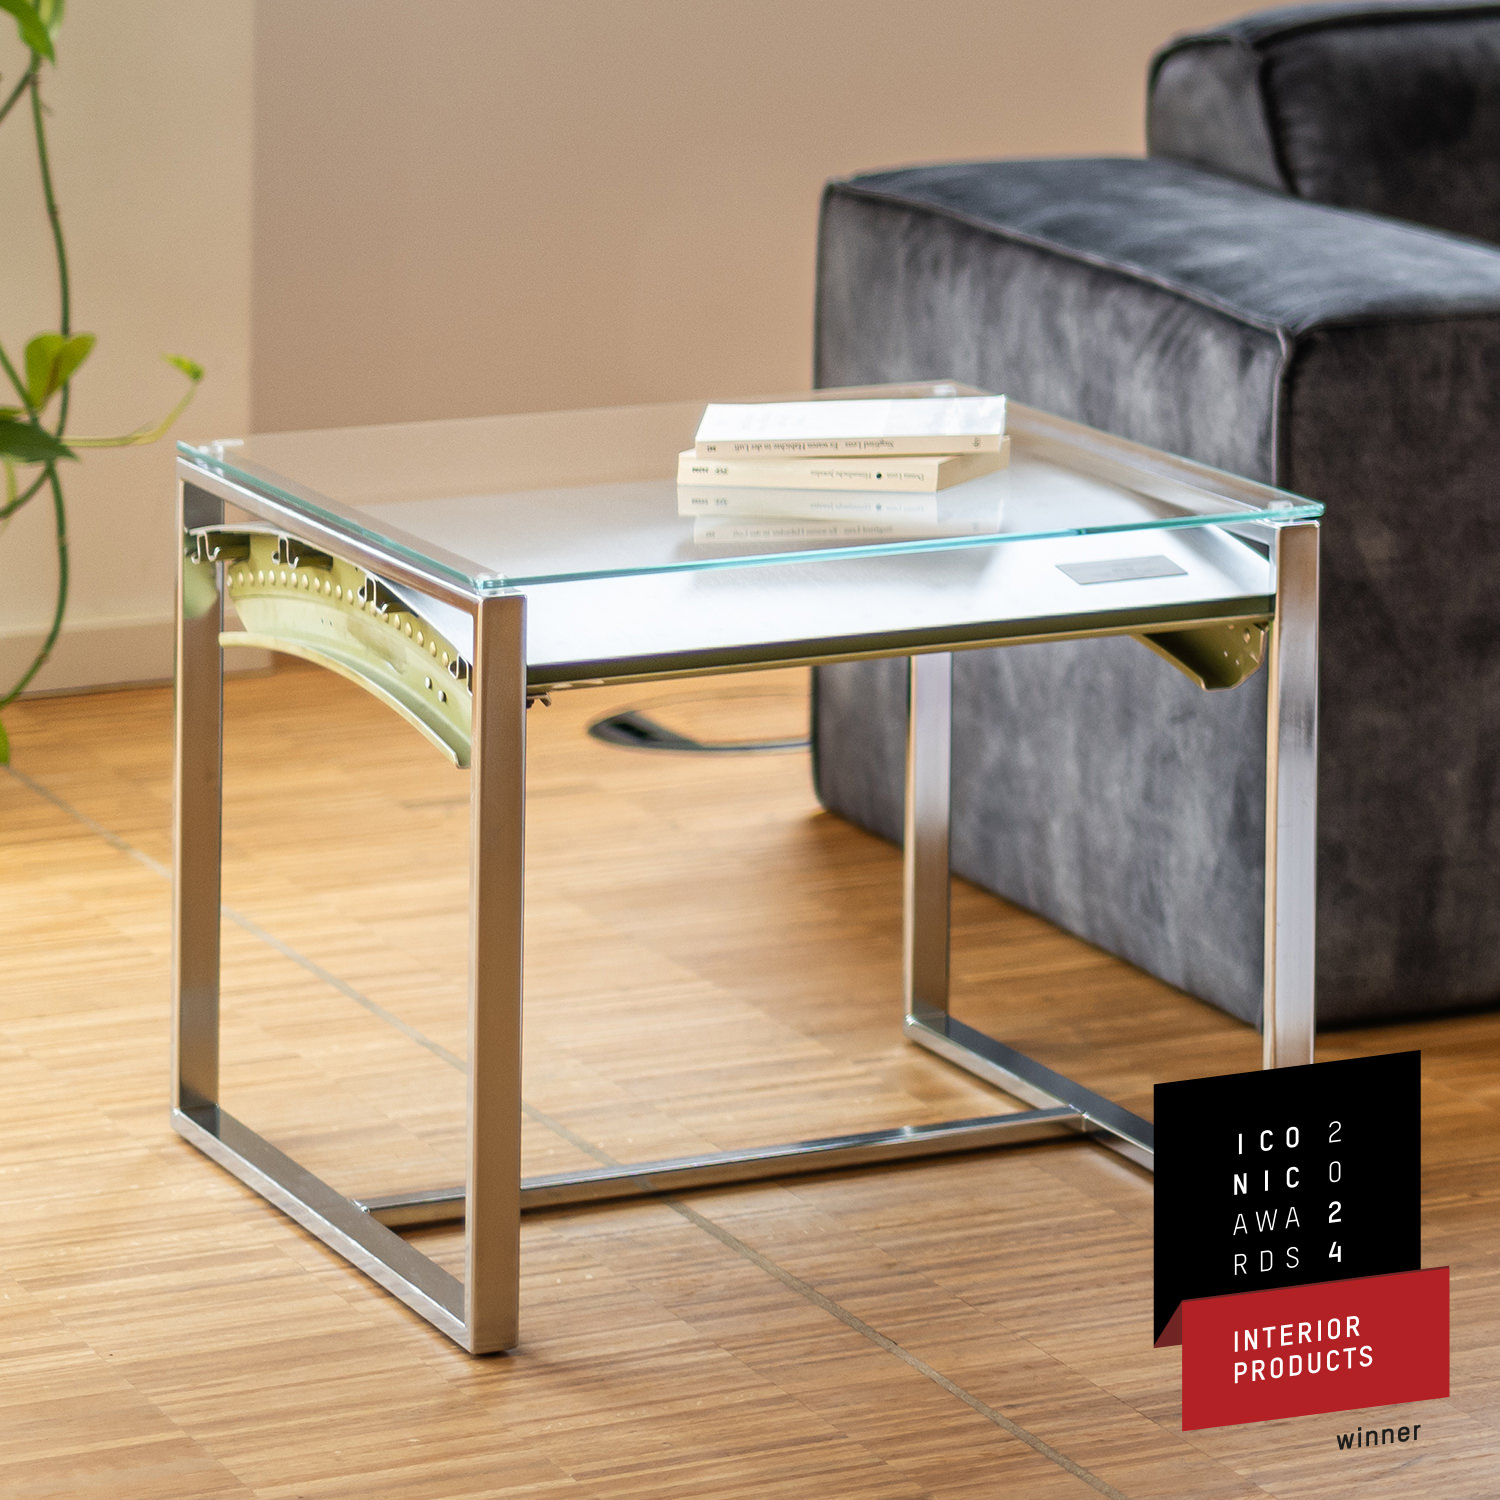 Side Table from Aircraft Parts with Glass Top McDonnell Douglas MD-80, Brushed Aluminum, Frame: Chrome, approx. 54 x 67 cm